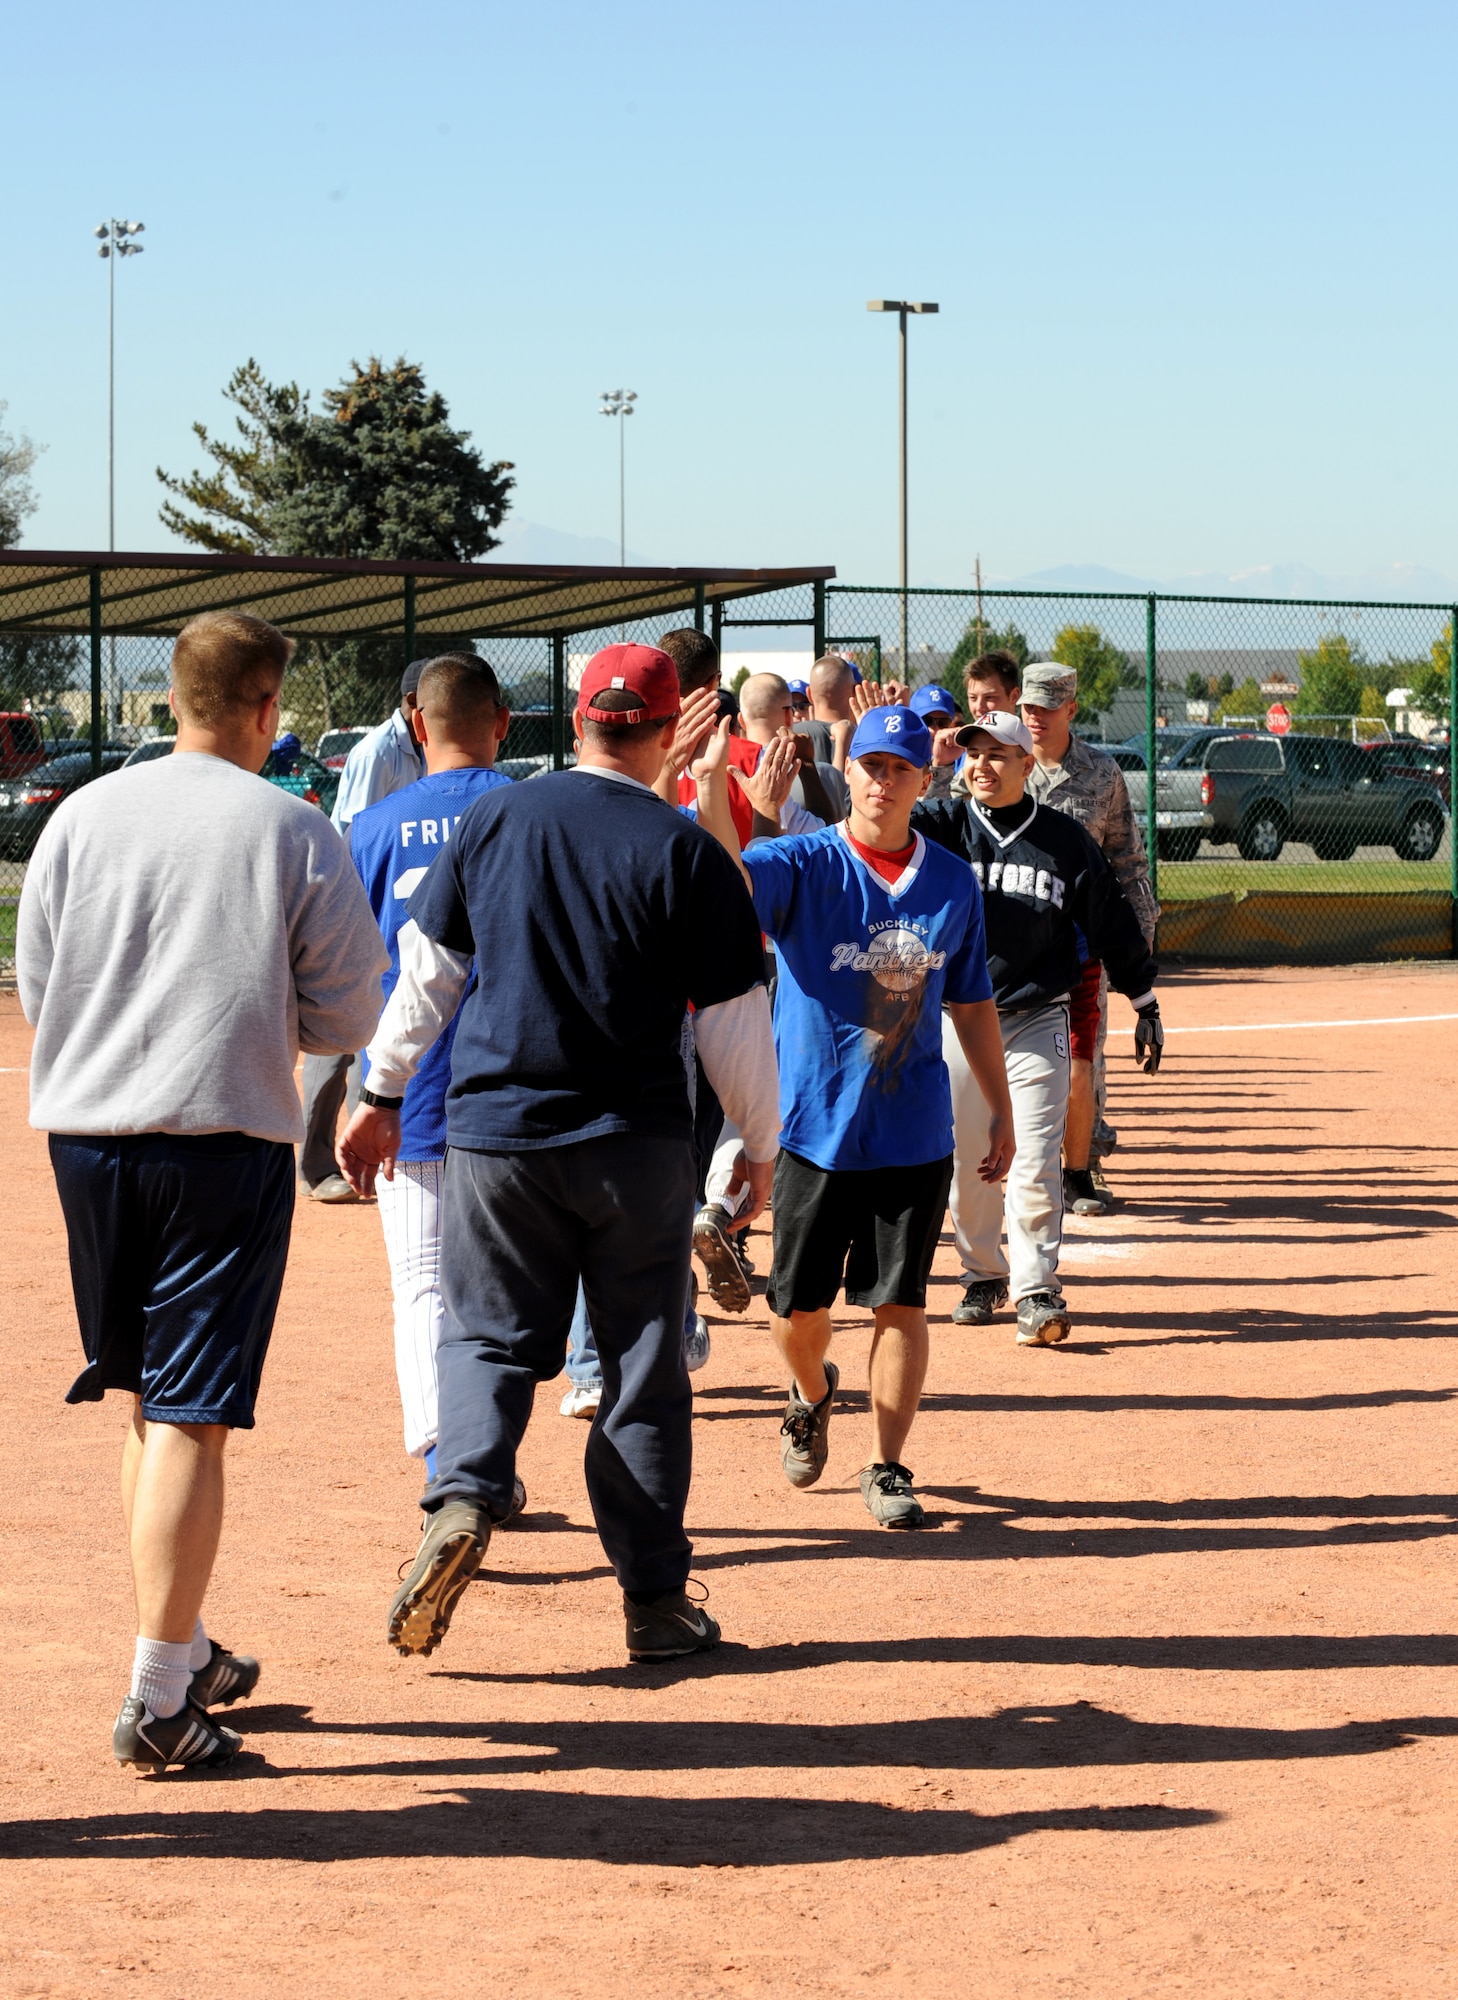 Buckley Air Force Base, Colo. – The 460th Buckley Panthers and the Top 3/Commanders shake hands after a softball game during Buckley’s Sports and Field Day Oct. 2. The Panthers beat the Top 3/Commanders team 13-8. (U. S. Air Force photo by Senior Airman John Easterling)